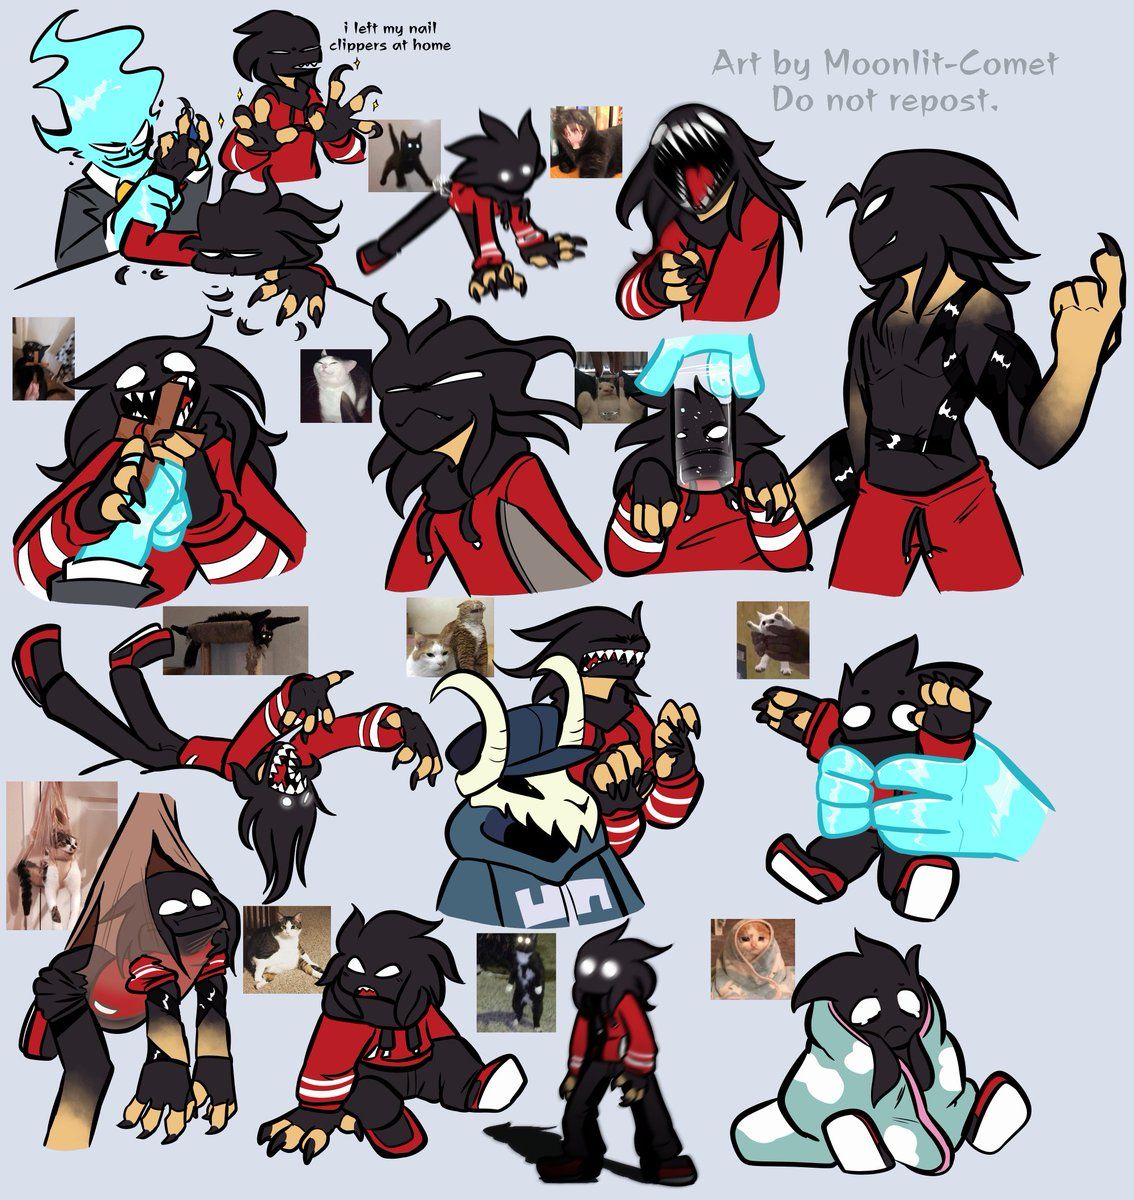 Moonlit Comet asked my server goers to send me cursed cat image so I could redraw them as AGOTI, here are the results [plus some others] #fnf #fridaynightfunkinfanart #fnfagoti #